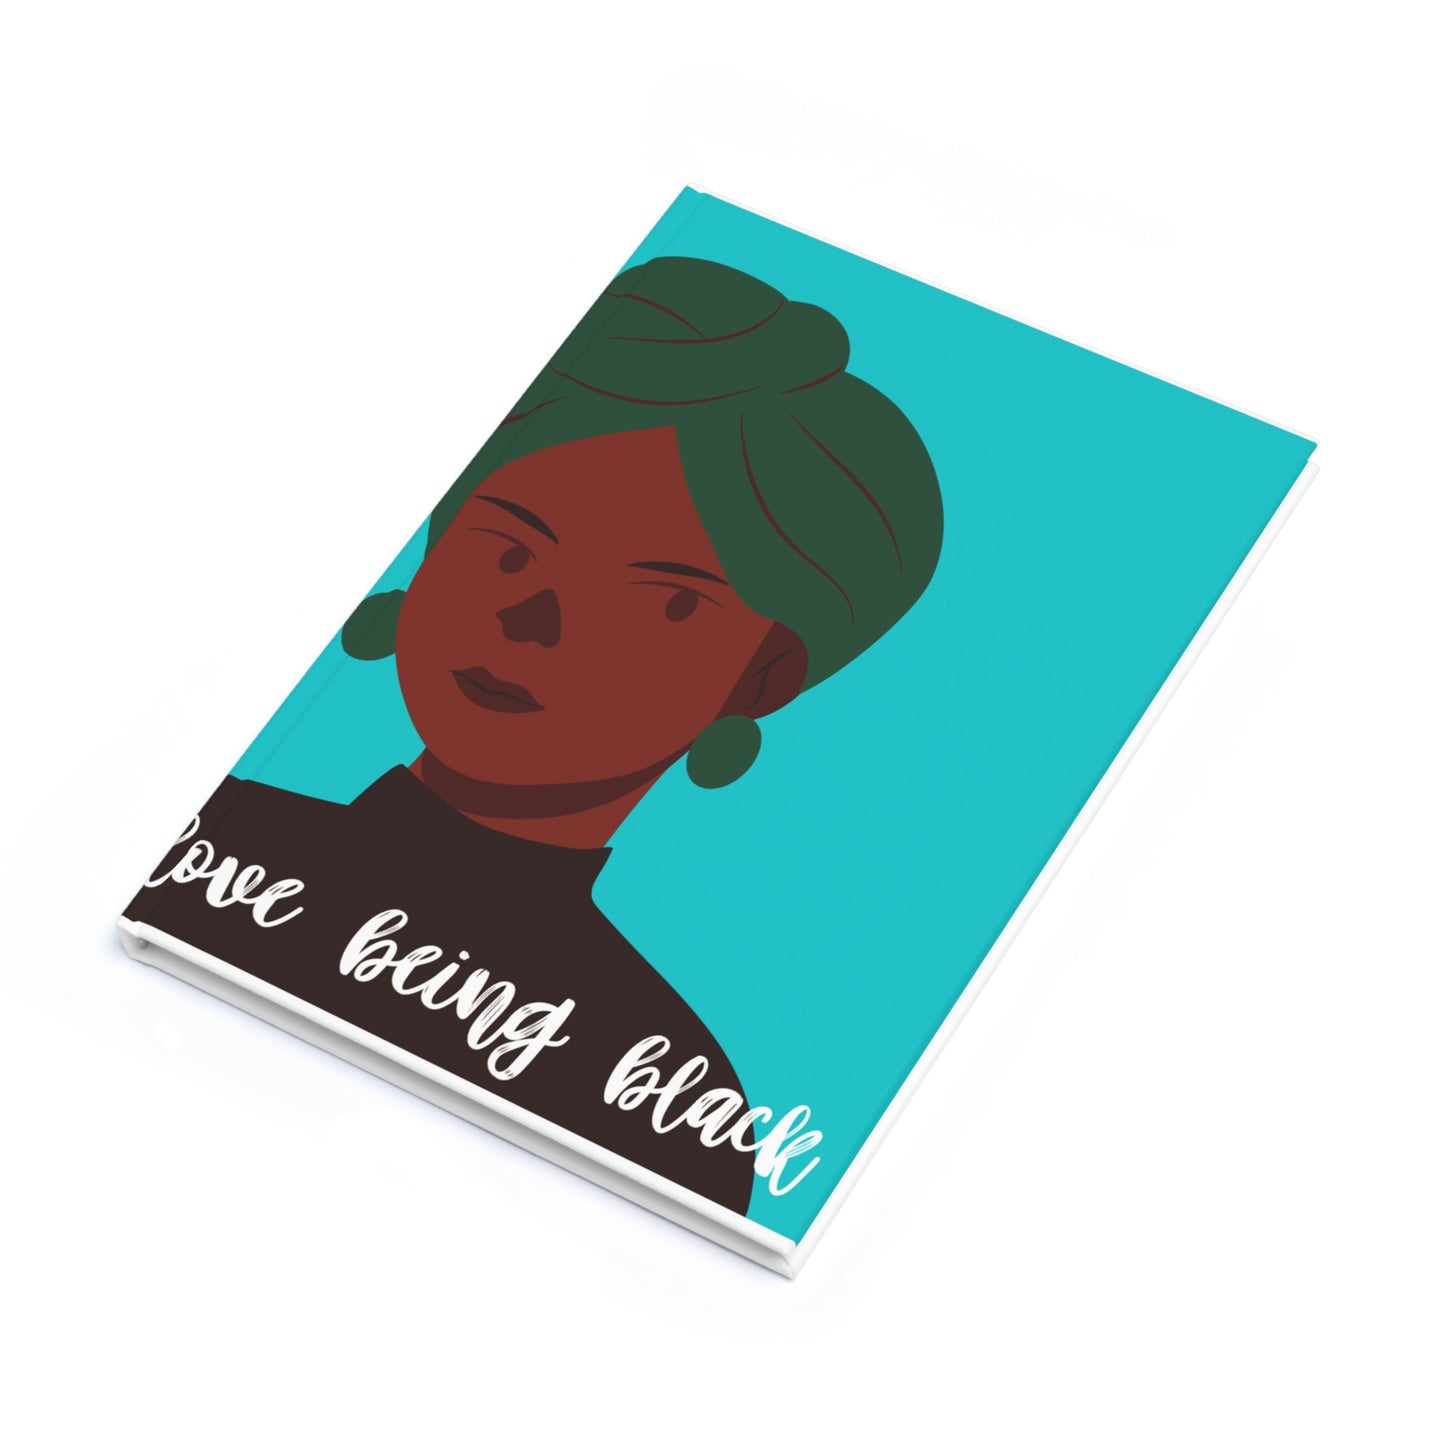 Love being black - Hardcover Journal (A5)